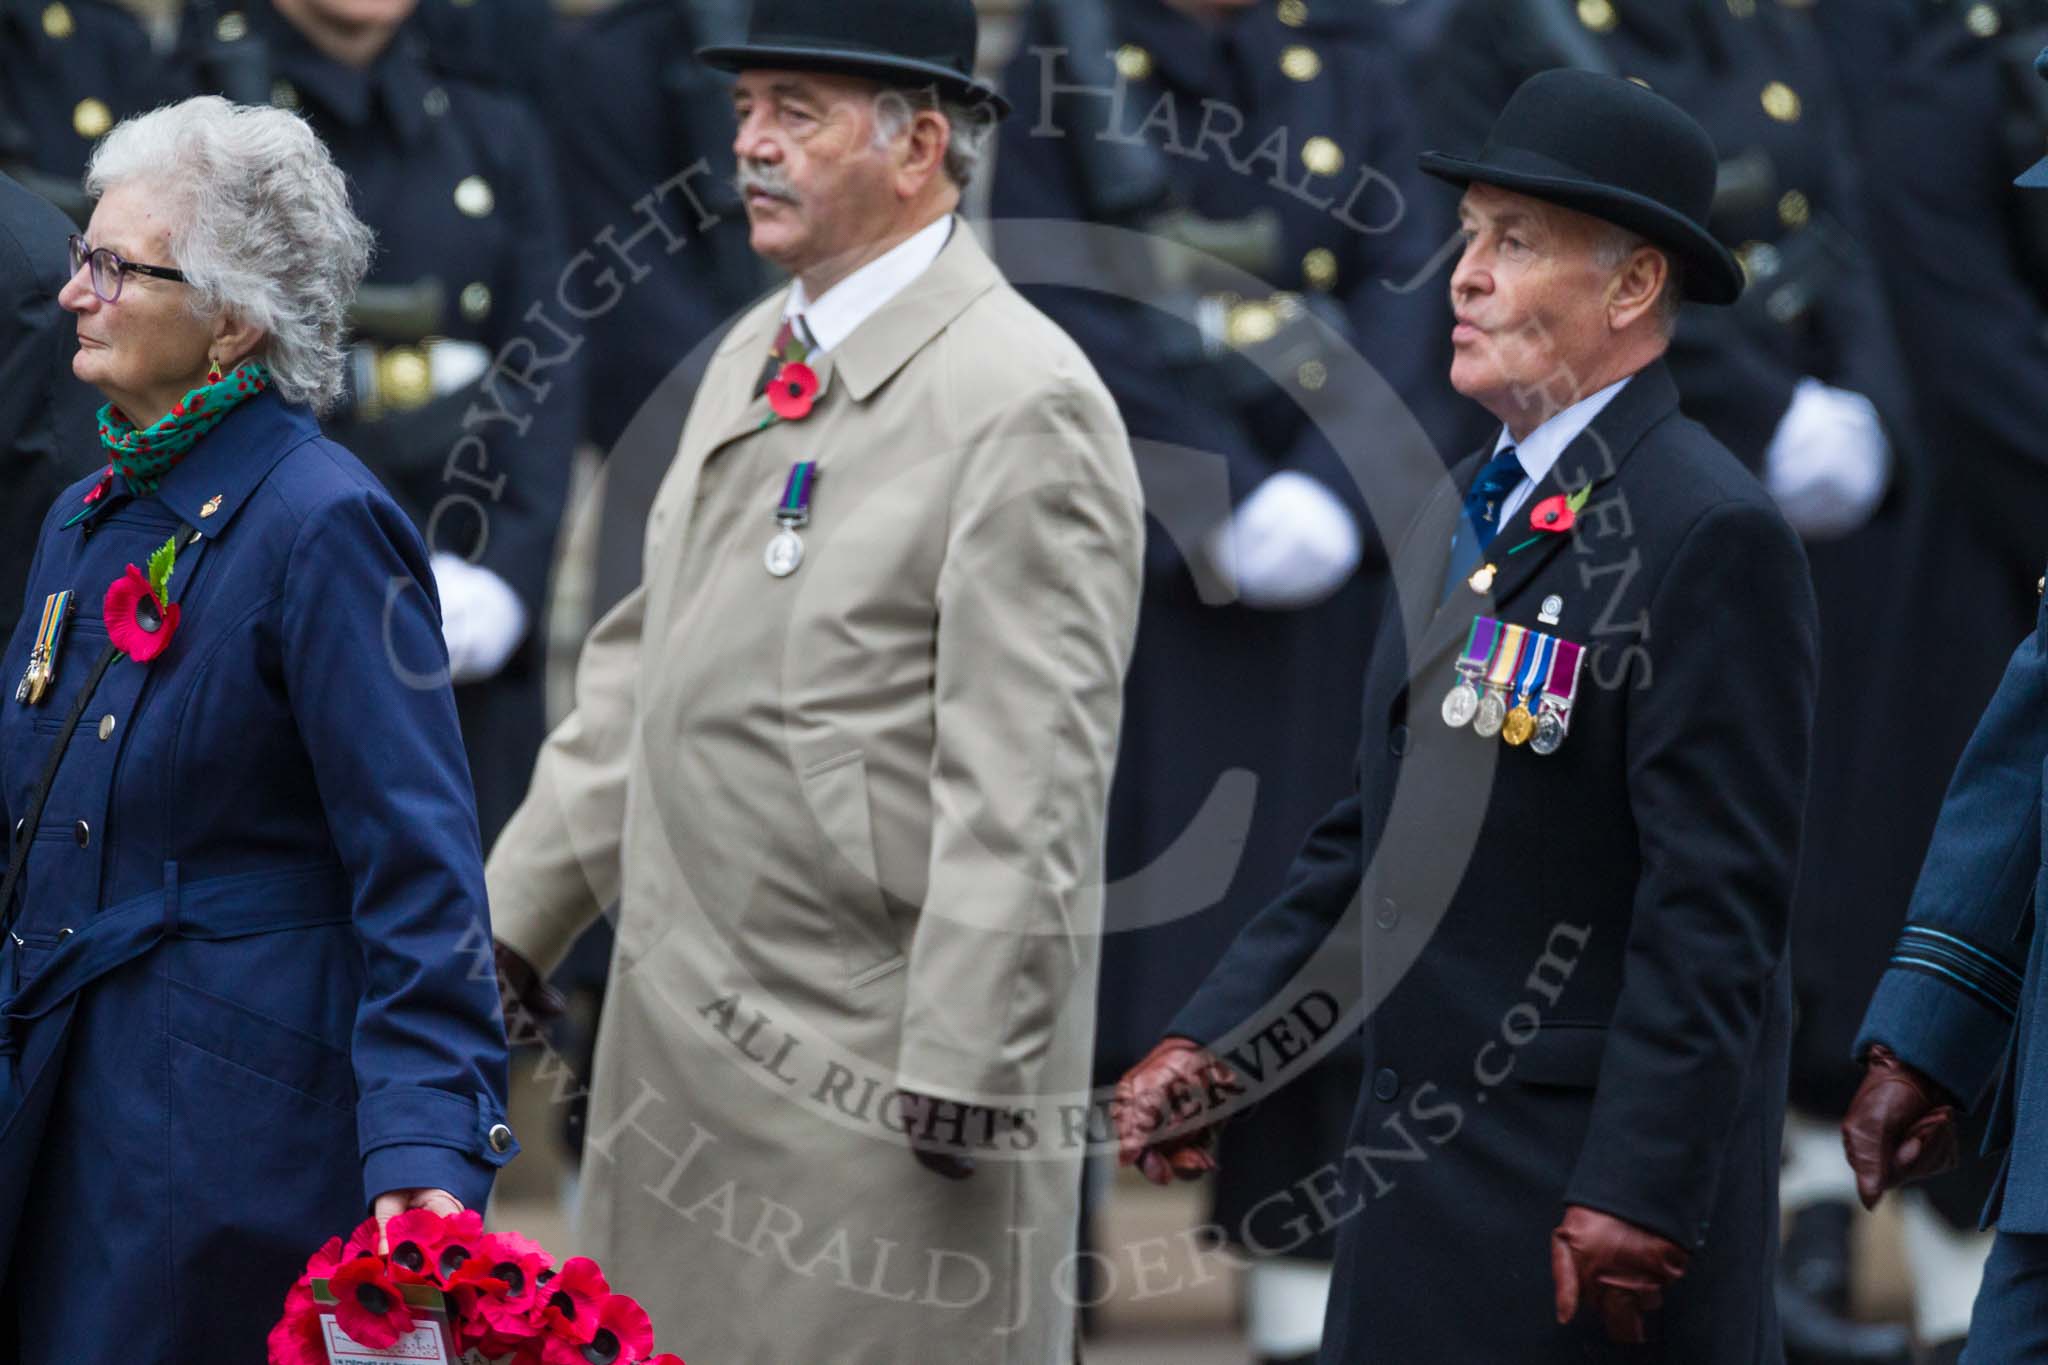 Remembrance Sunday at the Cenotaph 2015: Group F11, Black and White Club.
Cenotaph, Whitehall, London SW1,
London,
Greater London,
United Kingdom,
on 08 November 2015 at 12:05, image #1055